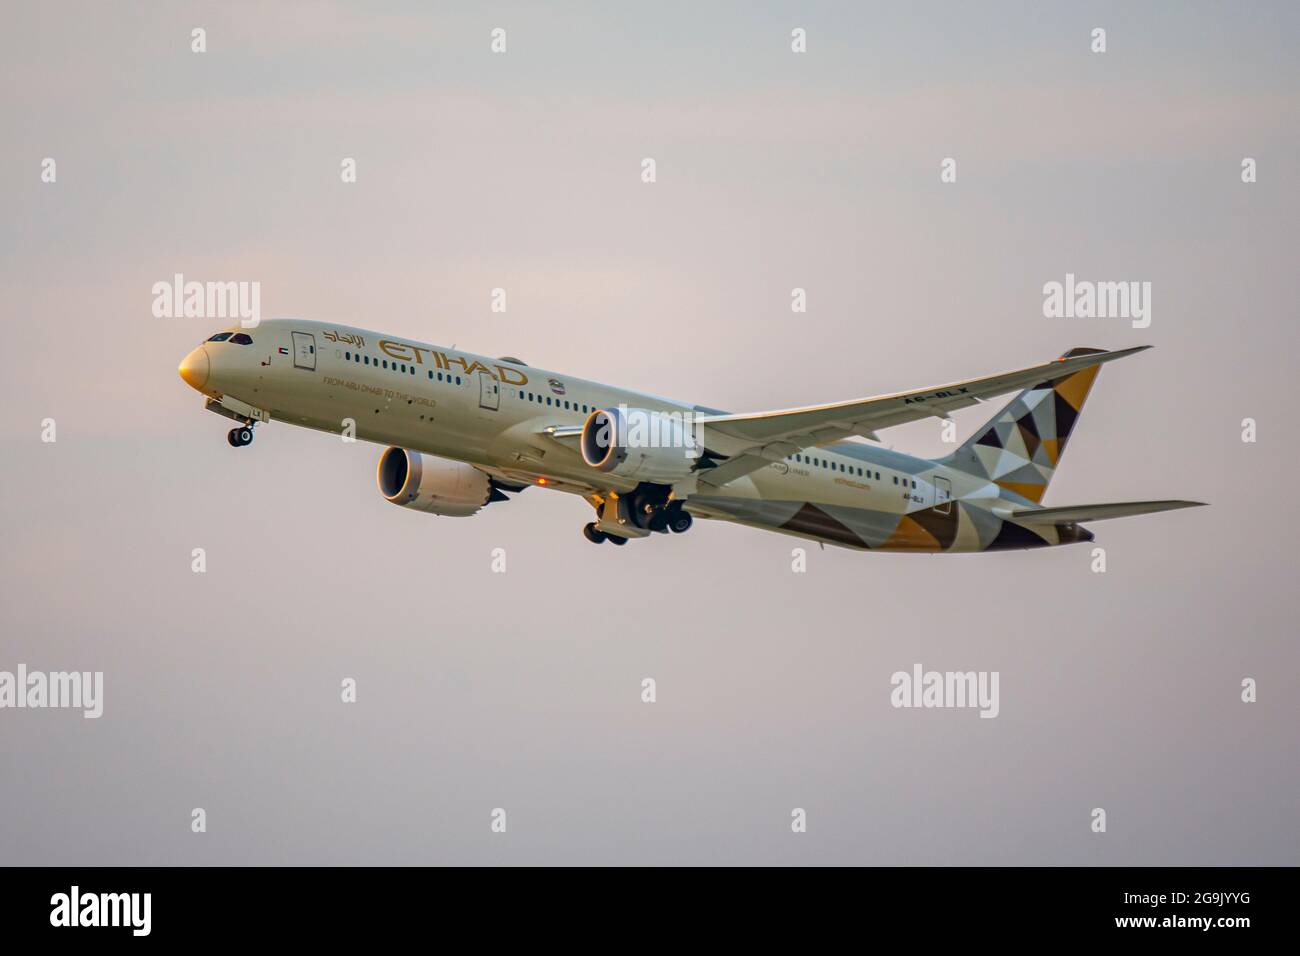 Chicago, IL, United States - July 25, 2021: Etihad Boeing 787-9 Dreamline (tail number A6-BLX) taking off from Chicago O'Hare International Airport. Stock Photo